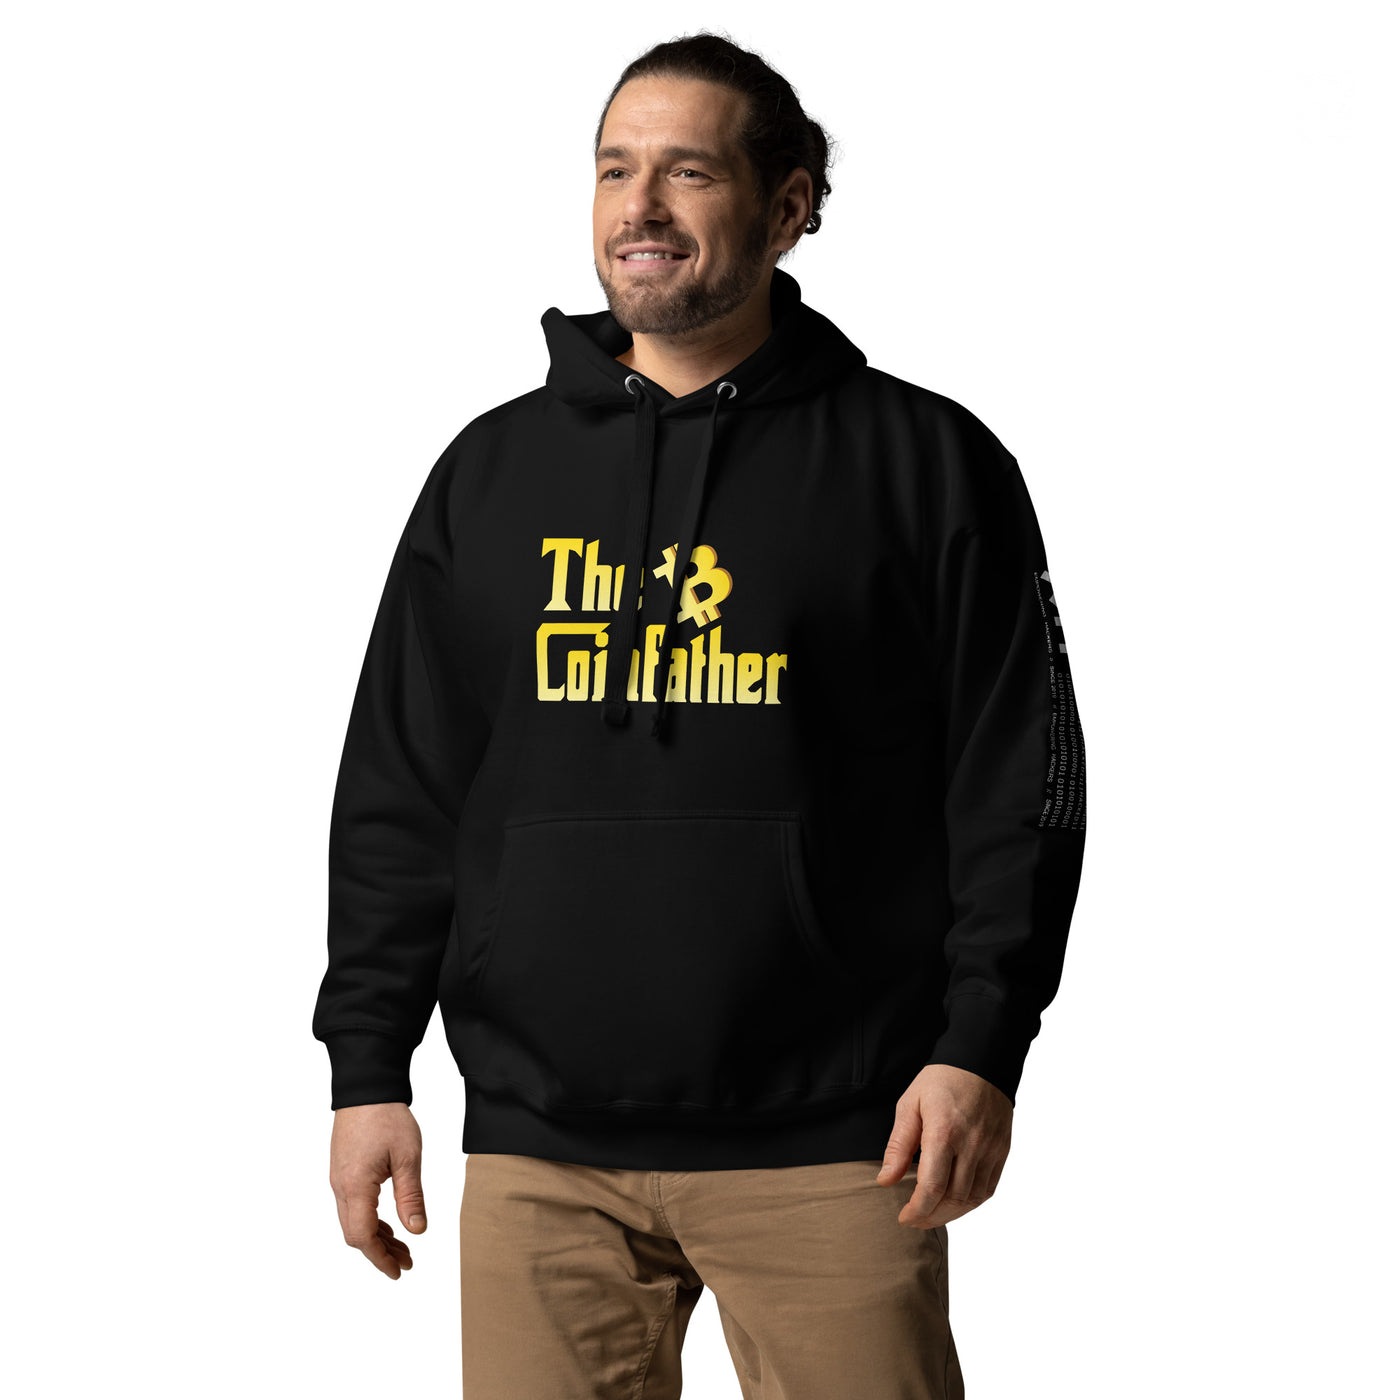 The Bitcoin Father - Unisex Hoodie